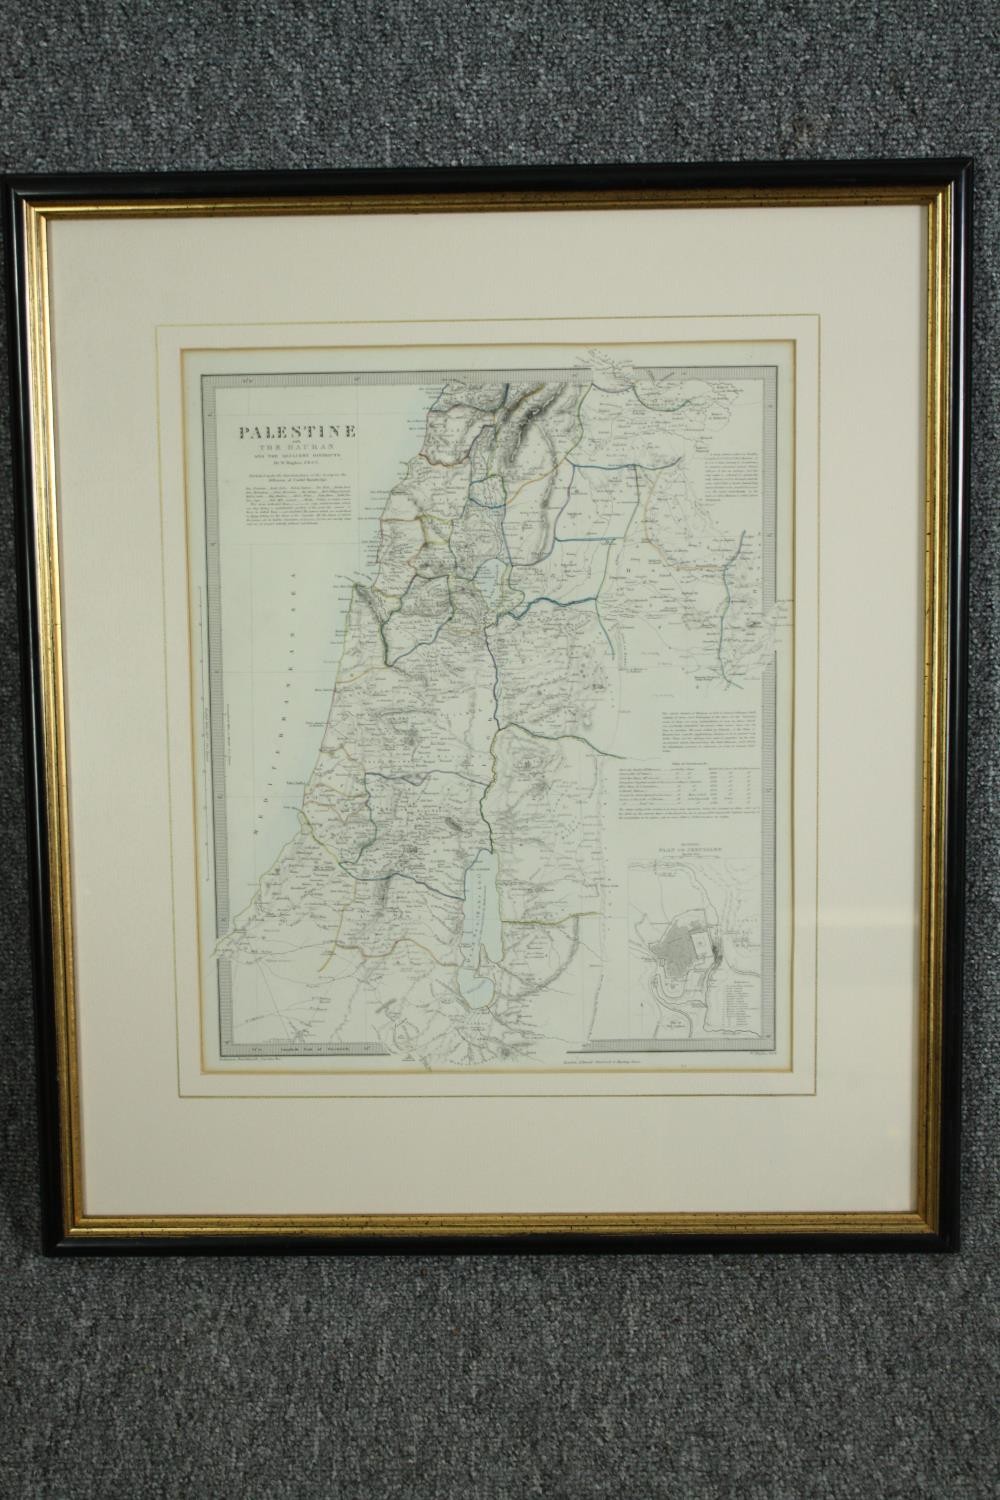 Two Engravings, 19th century hand coloured, one Palestine and the other Germany, framed and - Image 4 of 8